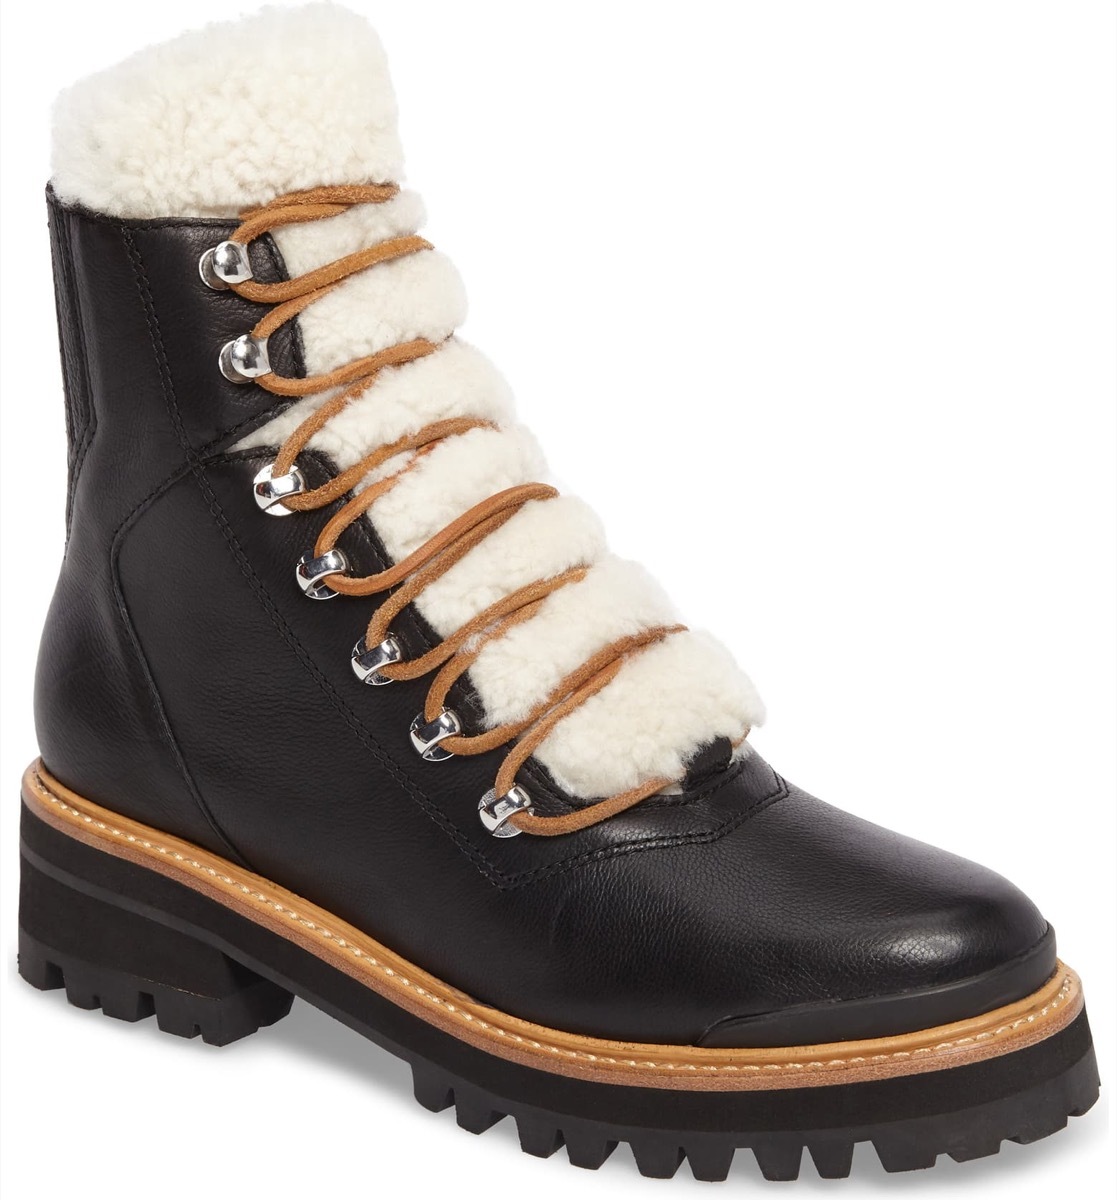 black lace up boots with white shearling tongue